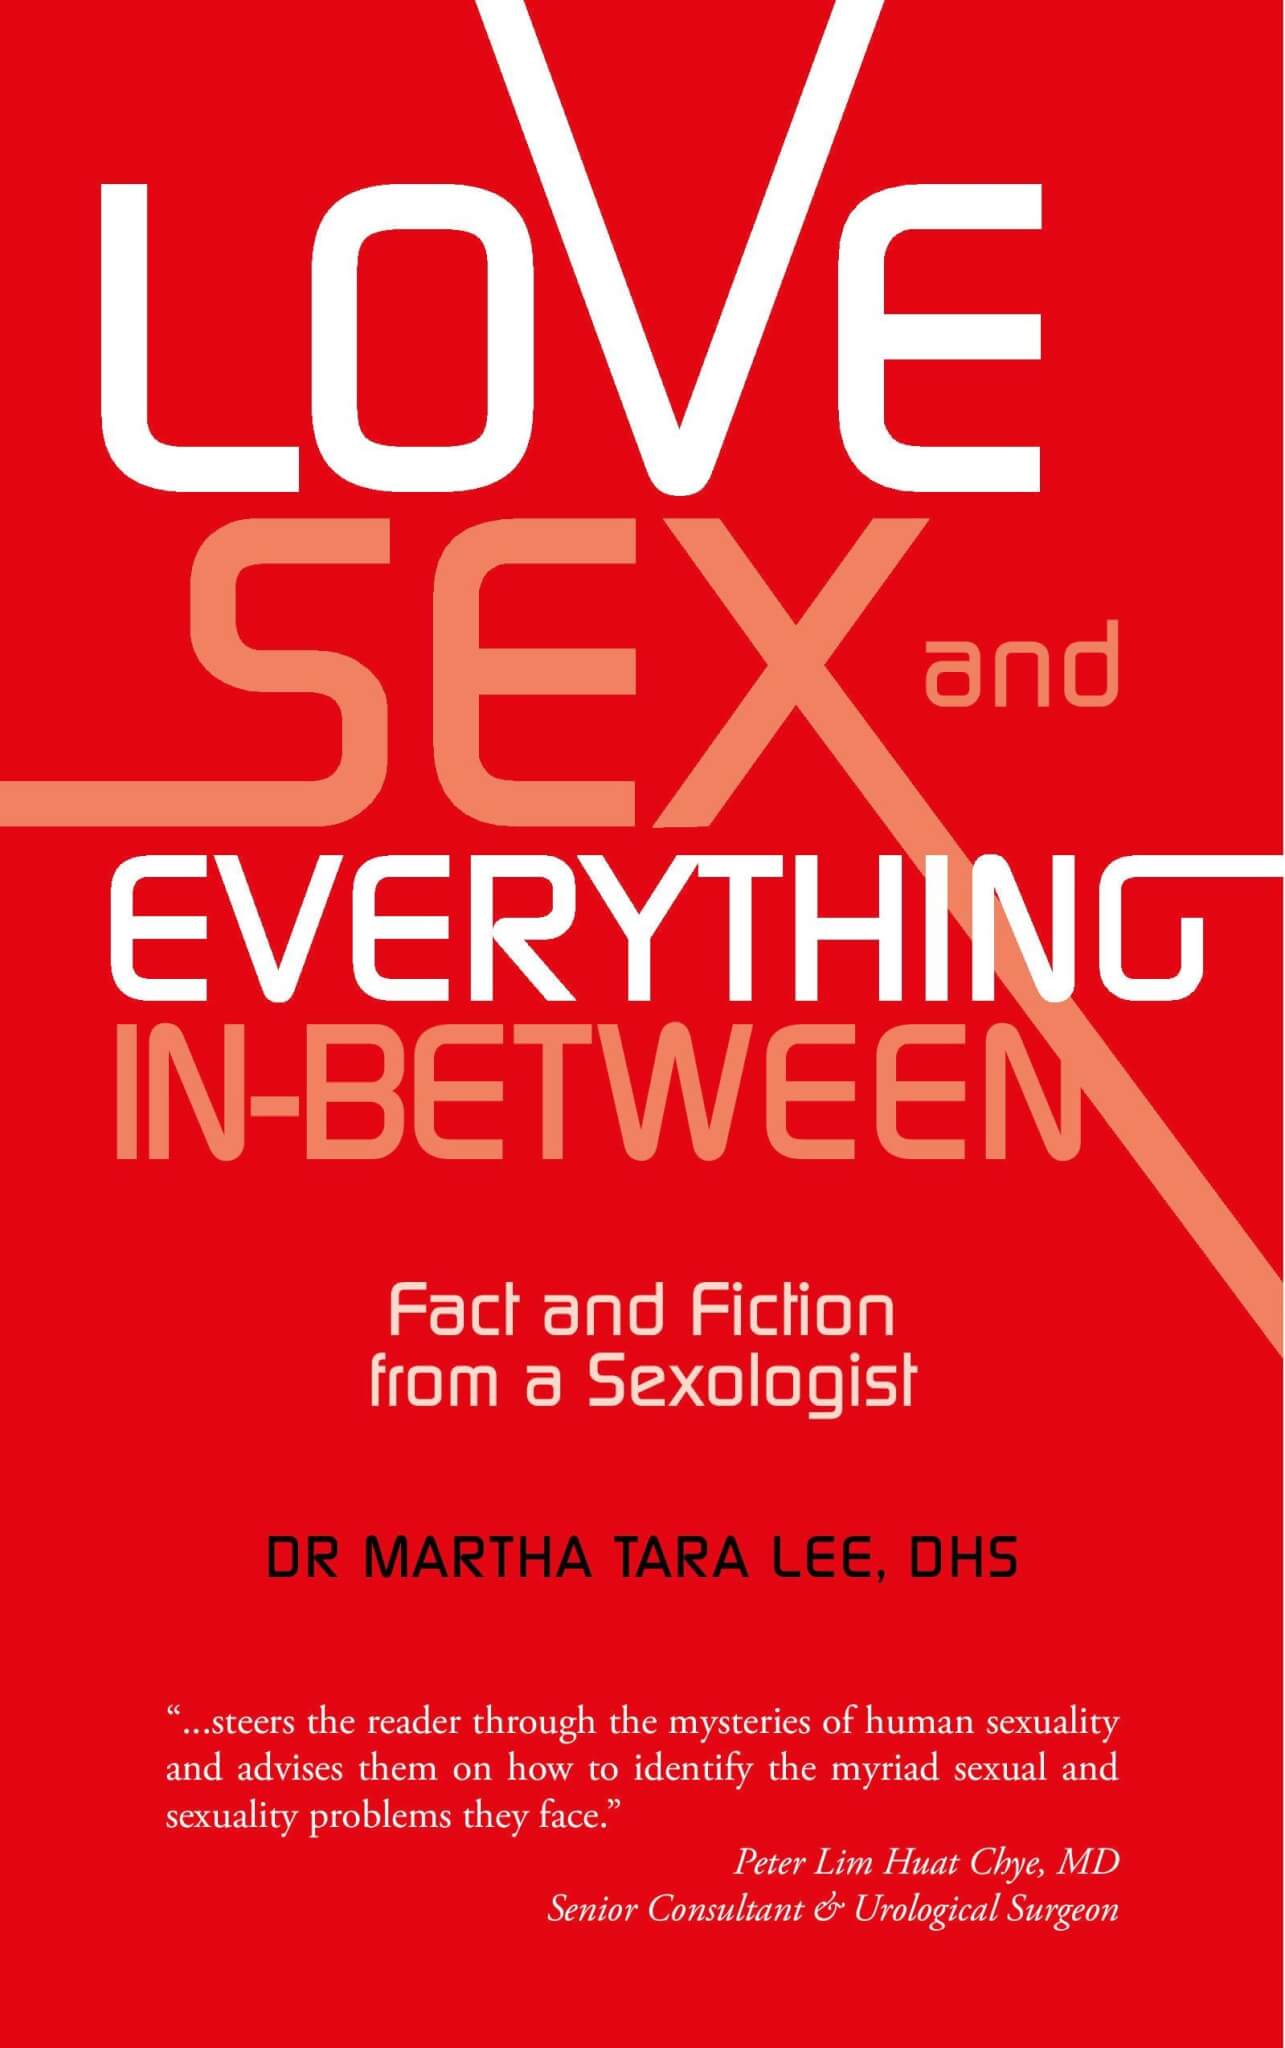 Testimonials – Love, Sex and Everything In-Between